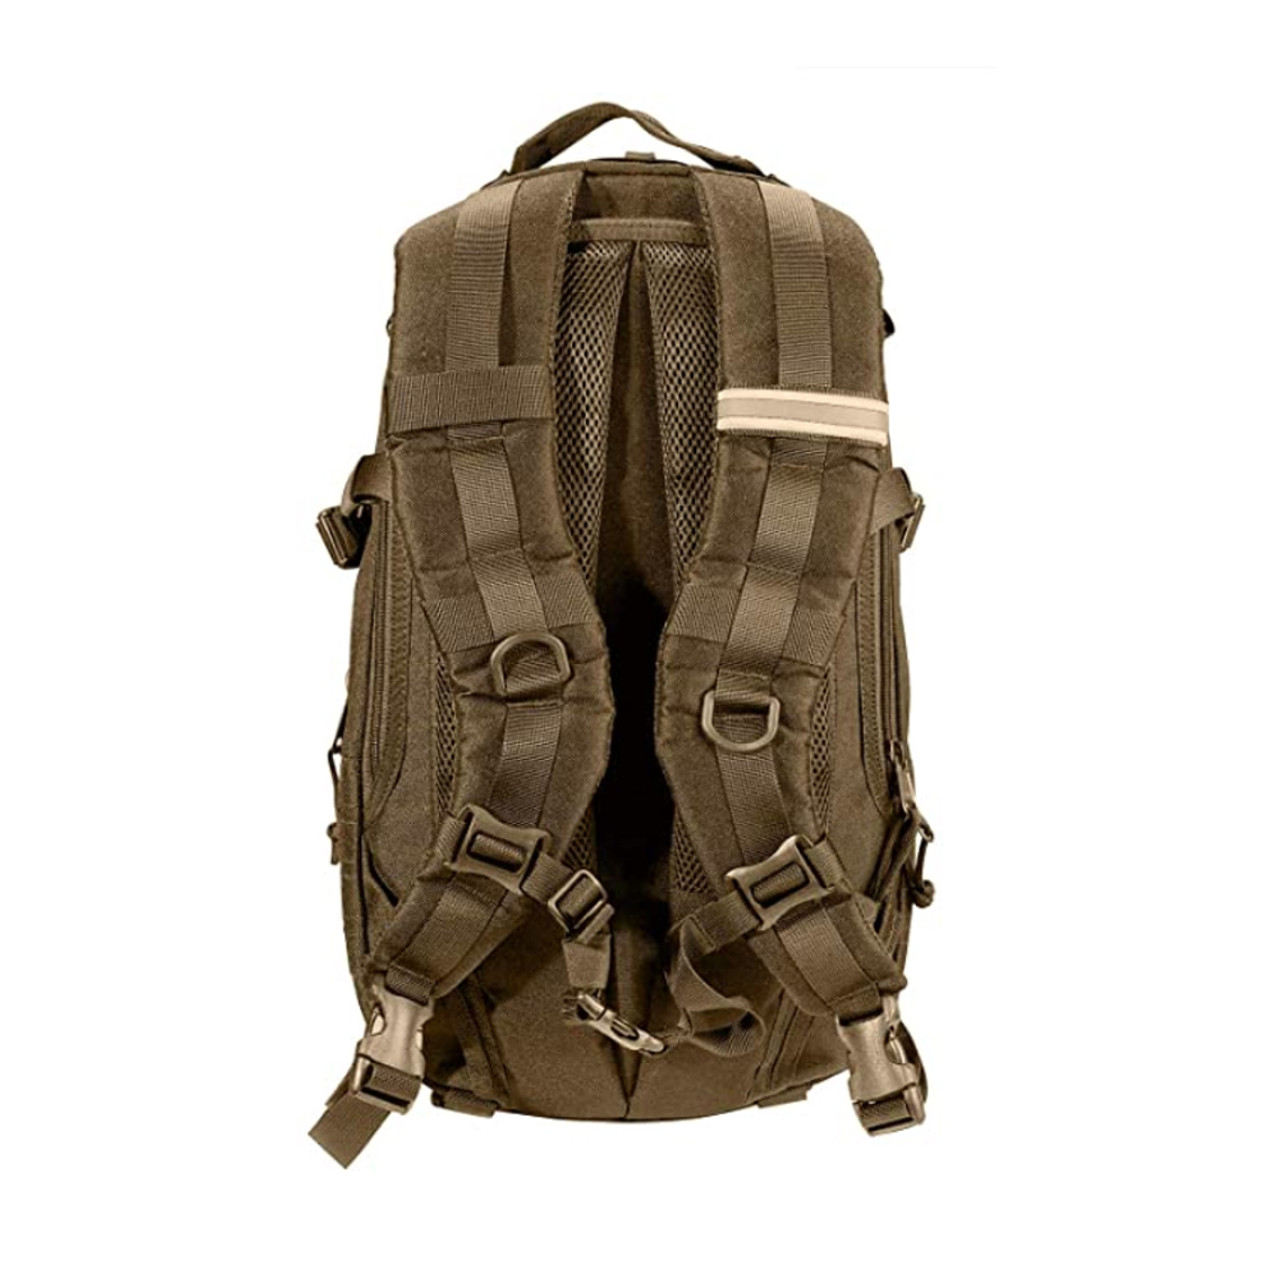 Mil-Tec 20l Small Laser Cut Assault US Tactical Backpack MOLLE Coyote Tan  for sale online